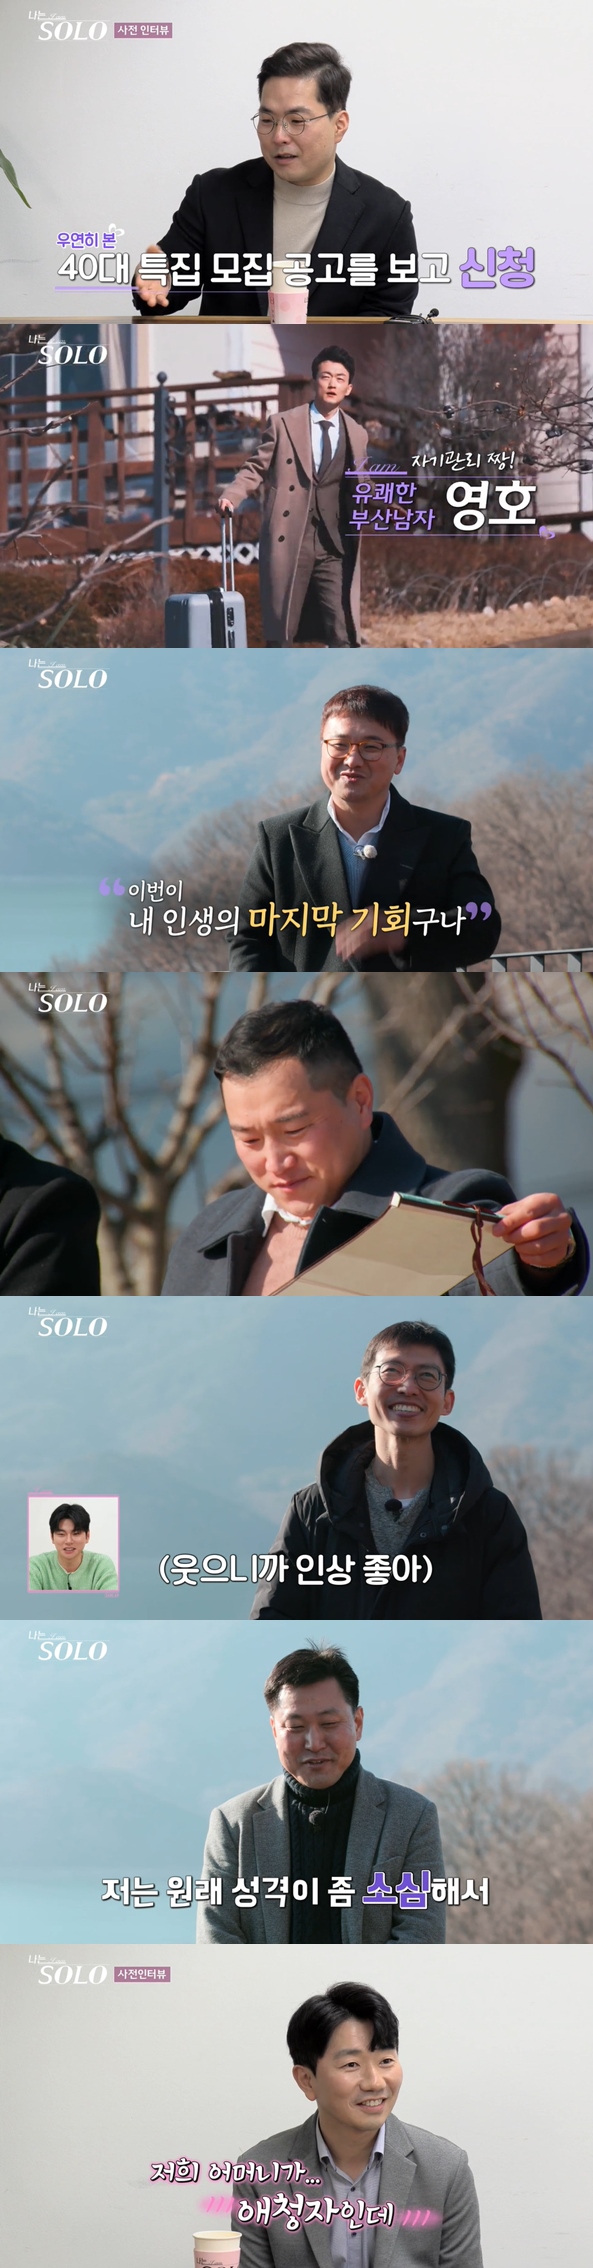 40sThe first meeting of Solo men and women was drawn.SBS Plus, which aired on the last 6 days, and NQQ Im SOLO (I Solo) have 7th 40sThe images of Solo men and women have been released.Defconn said, During the sixth phase, there are four marriage couples. It is enormous.Its a special feature, he said, expressing his proud heart.The first to appear was Solo Nam, who said: Only 45 years old.I think it is my boss because I have seen it over time, said Youngsu, who said the two marriage plans were canceled.The second Solo was Young-ho, who said: Last year I came out on a normal weight and I dont have any weight on my face, when I get on the air, I get a filler two weeks ago.I set my hair with my make-up on a business trip, he laughed.I was giving up marriage, but I couldnt sleep on the phone, this was my last chance of life, I thought I was going to appear unconditionally, the next Solo Nam Young-sik said.The fourth Solo Nam Young-chul appeared in the show, showing off his top man force, and Young-chul also released the video saying that he had broken 50 prefabricated tiles at once.Young-chul laughed about the unusual ideal type.There were a few marriage opportunities, I dont think I had any desperation for marriage and there were many shifts in many countries on my business, Kwangsoo said.Kwangsoo was an able person who attended the World Bank and other countries in the United States.I have never expressed my love first, Sang-chul said. It gets worse because I get older. I have no more courage.Sang-cheol also expressed his willingness to come back with a strong heart.My mother is a listener, and she called me down, so I saw her and decided to appear, said the last Solo Nam Kyungsu.Kyung-soo said, I think I have done Confessions several times to my ex-girlfriend.Seven Solo girls followed by Solo girls; the first Young-sook boasted beauty during her 42-year-old career; Young-sook said she had no time for study and work, so she couldnt have a relationship.Young-sook was a lawyer.The second solo girl, Jung Sook, was a voice actor. Jung Sook was active in advertising, games, and animation. Jung Sook shook his head, saying, Mama Boy should not die.I like men who are not physically dry, men with large skeletons; I hate men with thinner calves than I do; I am completely out of control, Sunja said.I had no idea until I was 41, I thought I should be alone, the next Englishman said.Youngja said, I felt so sorry and sad that I was so sorry.The fifth Solo girl, 38, appeared. In the appearance of Oksun, the Englishman said, Han Chae-young resembles and MCs also acknowledged.Ok Soon was working for a global video service company, and Ok Soon, who had worked for a luxury brand and a global company before, was a multimillion-dollar salary earner.But Ok Soon was identified as Solo, drawing attention.Defconn, who watched this, said, It is ridiculous. How did you never have a relationship with a man when you were in a trendy company in the world?So Songhai laughed, saying, Do you see your appearance too?Photo: SBS Plus, NQQ broadcast screen